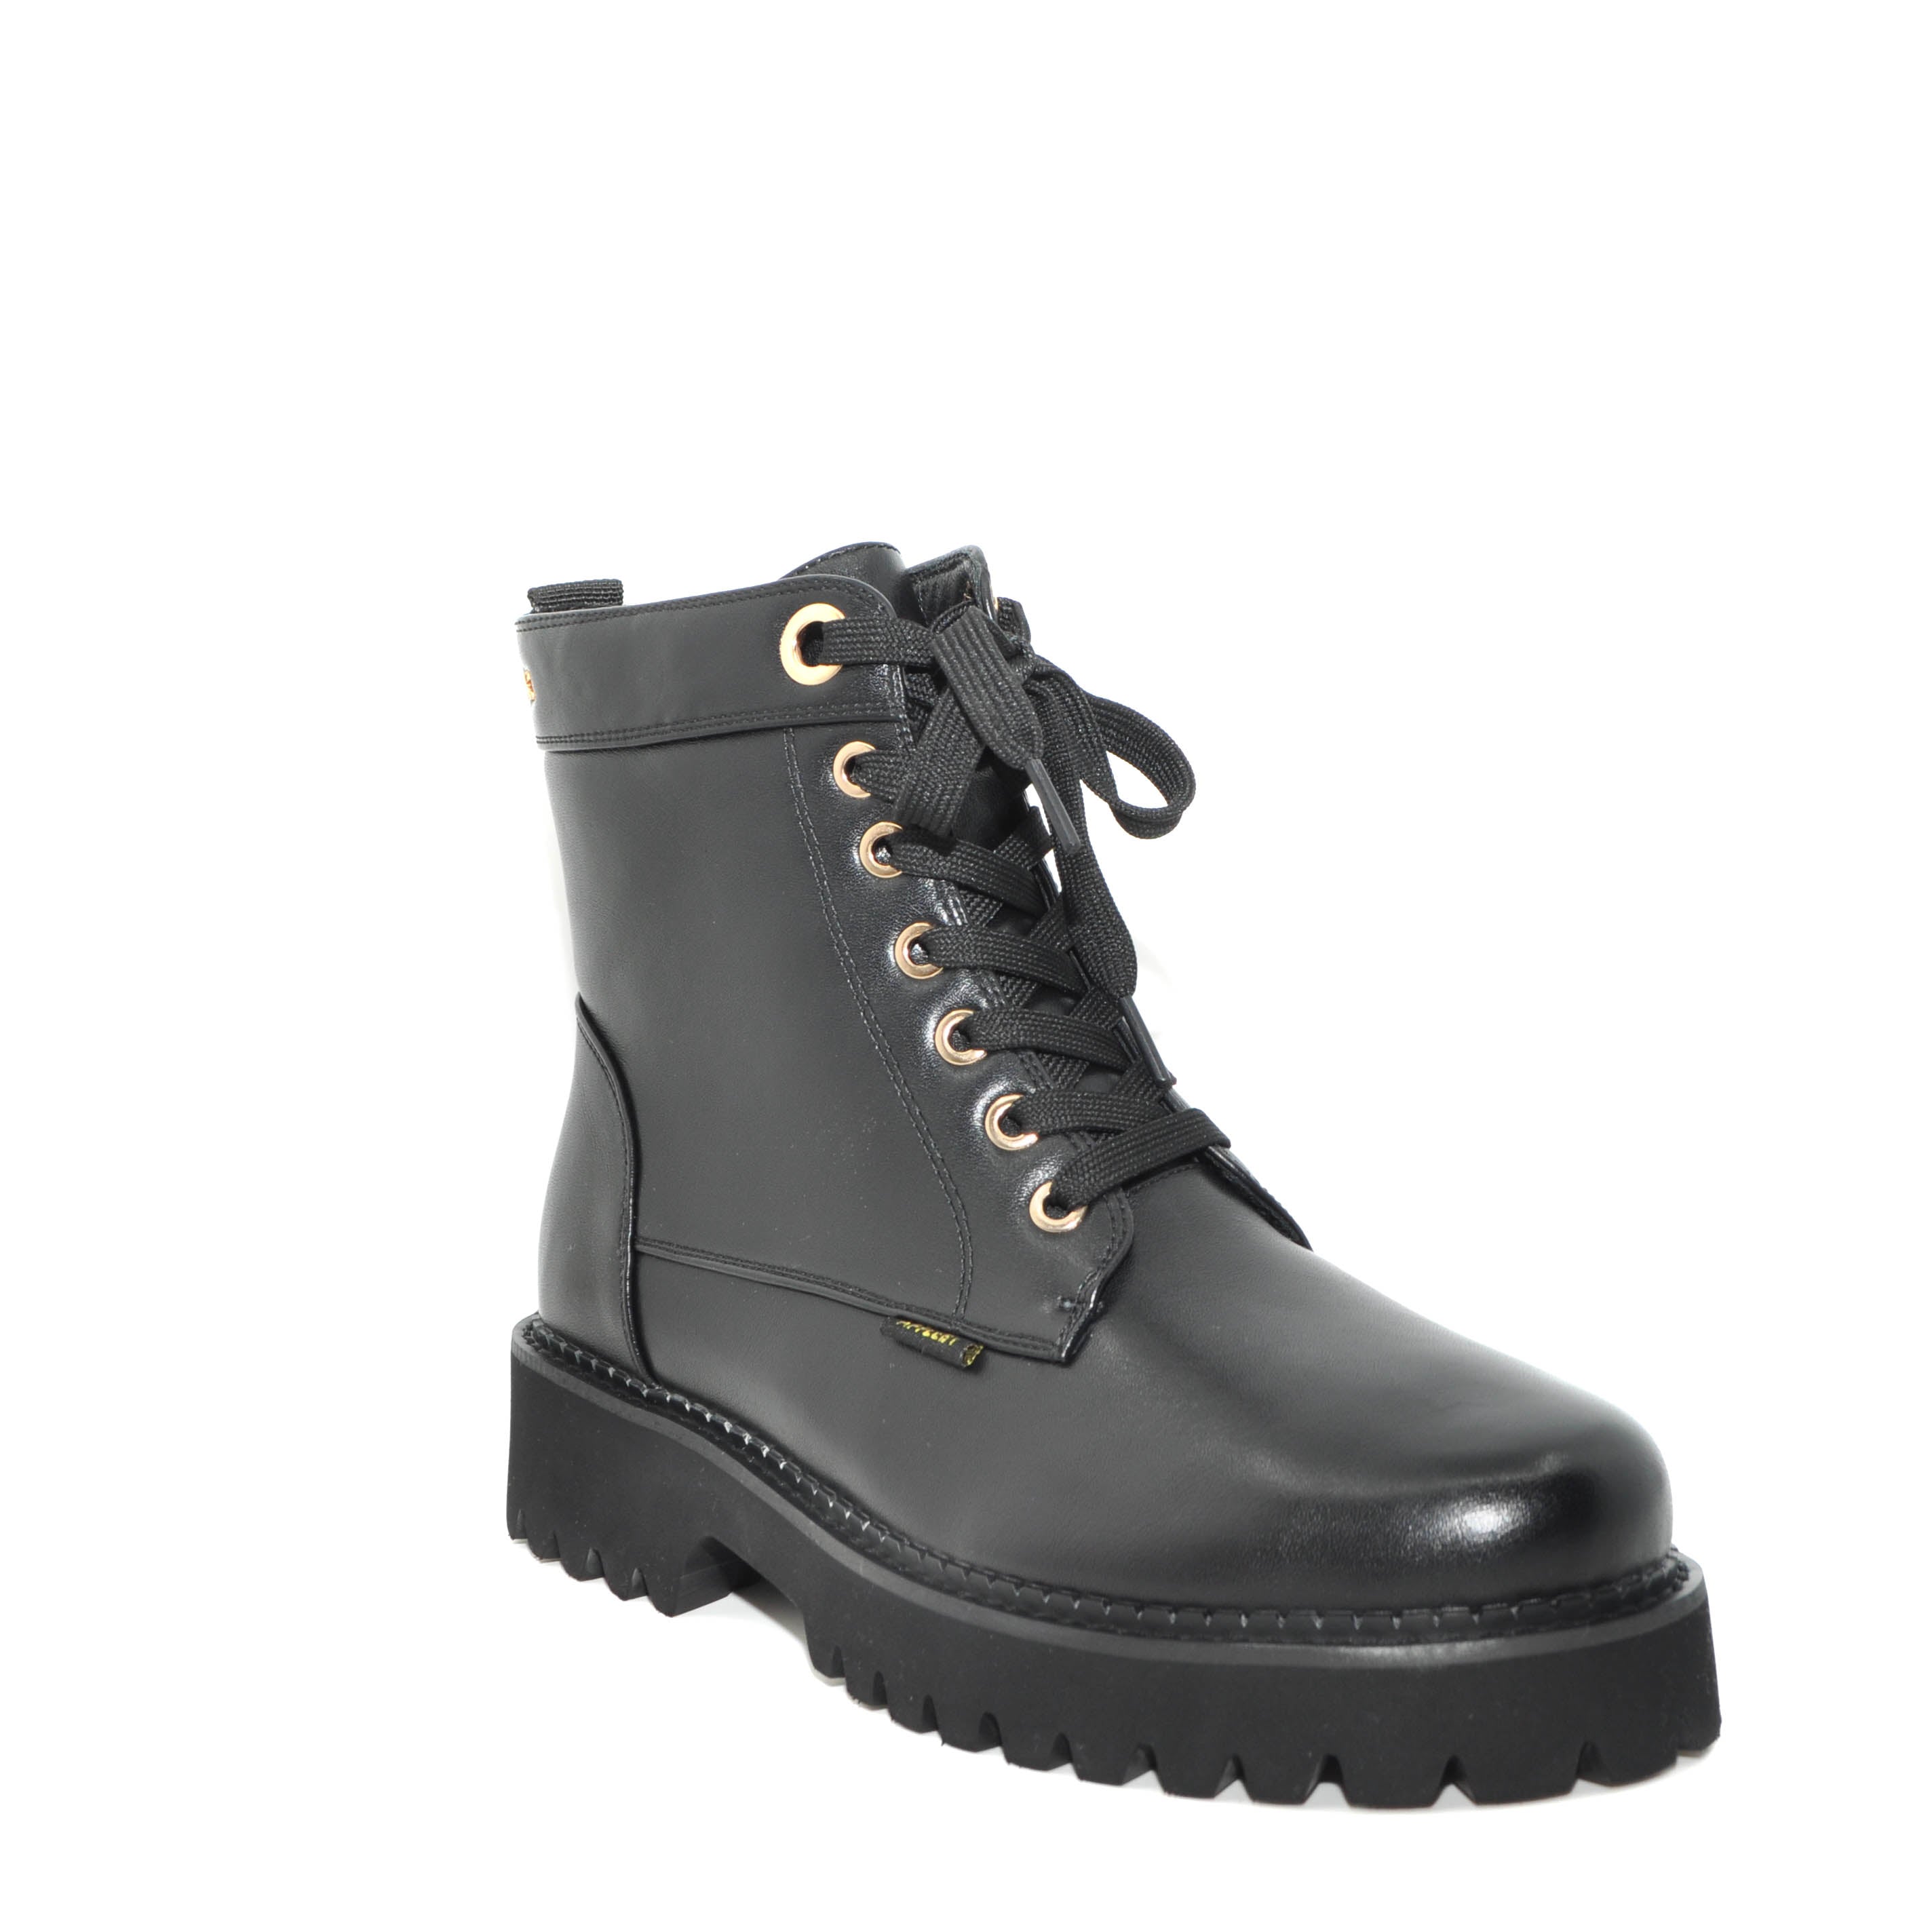 black lace up womens boots